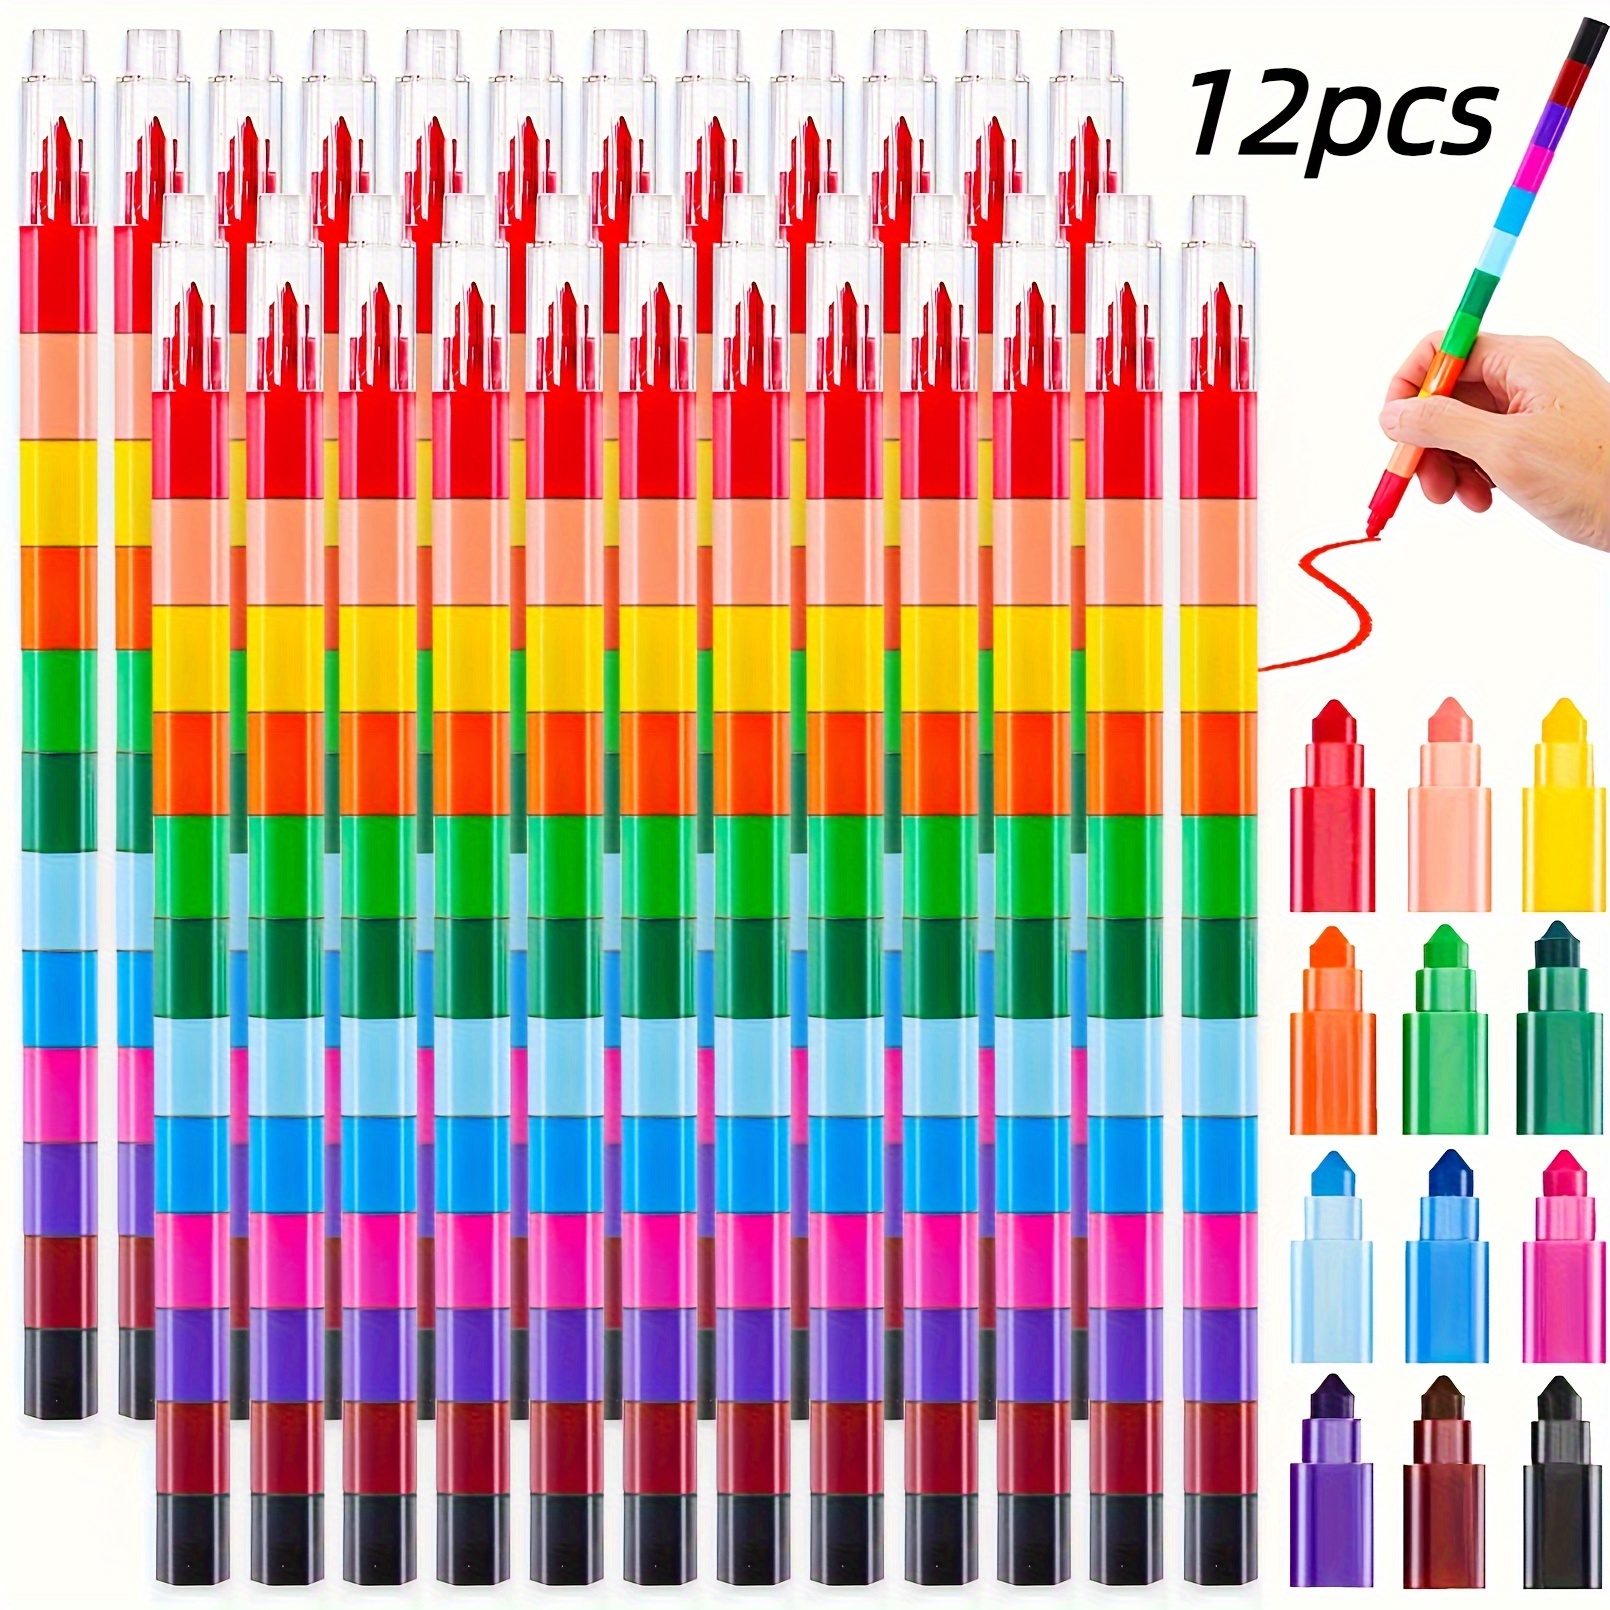 

12pcs Stacking Crayons, Stackable Plus Crayons, Colorful Stackable Crayons For Drawing Coloring, Stacking Diy Crayons, Rainbow Crayons Party Favors Classroom Office Learning Supplies, 12 Colors